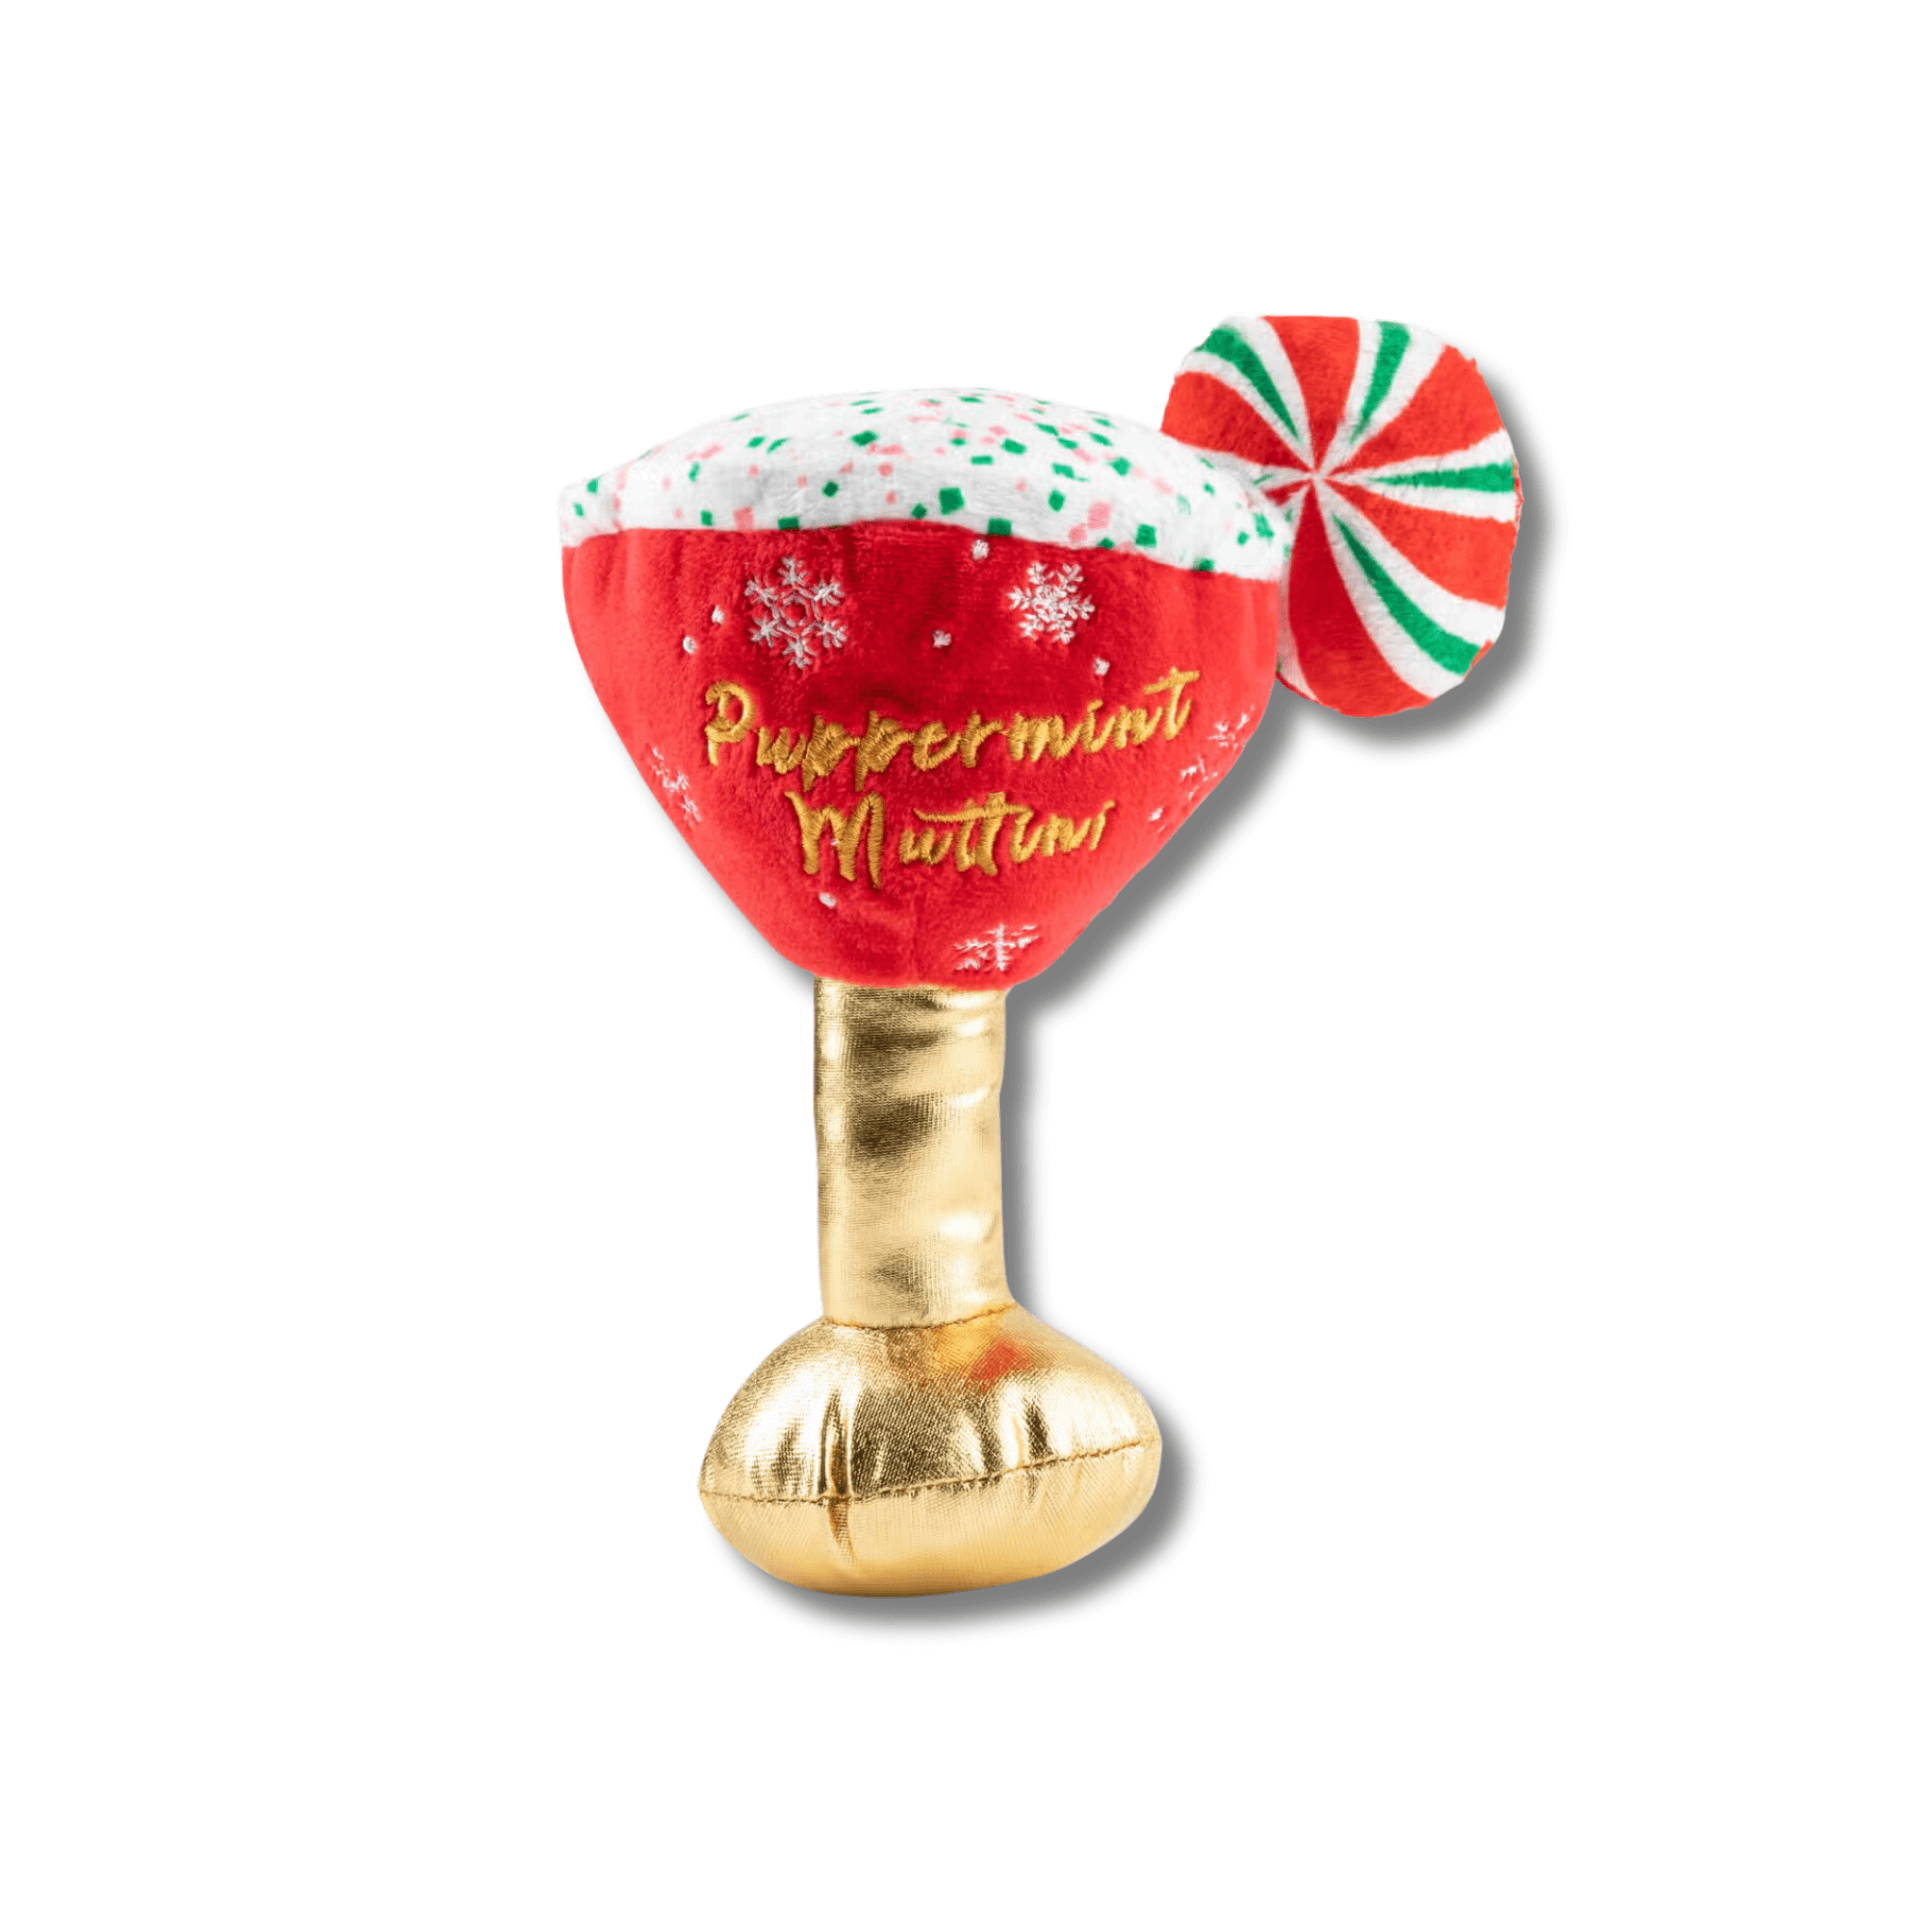 Christmas themed dog toy martini shaped, let's pawty 